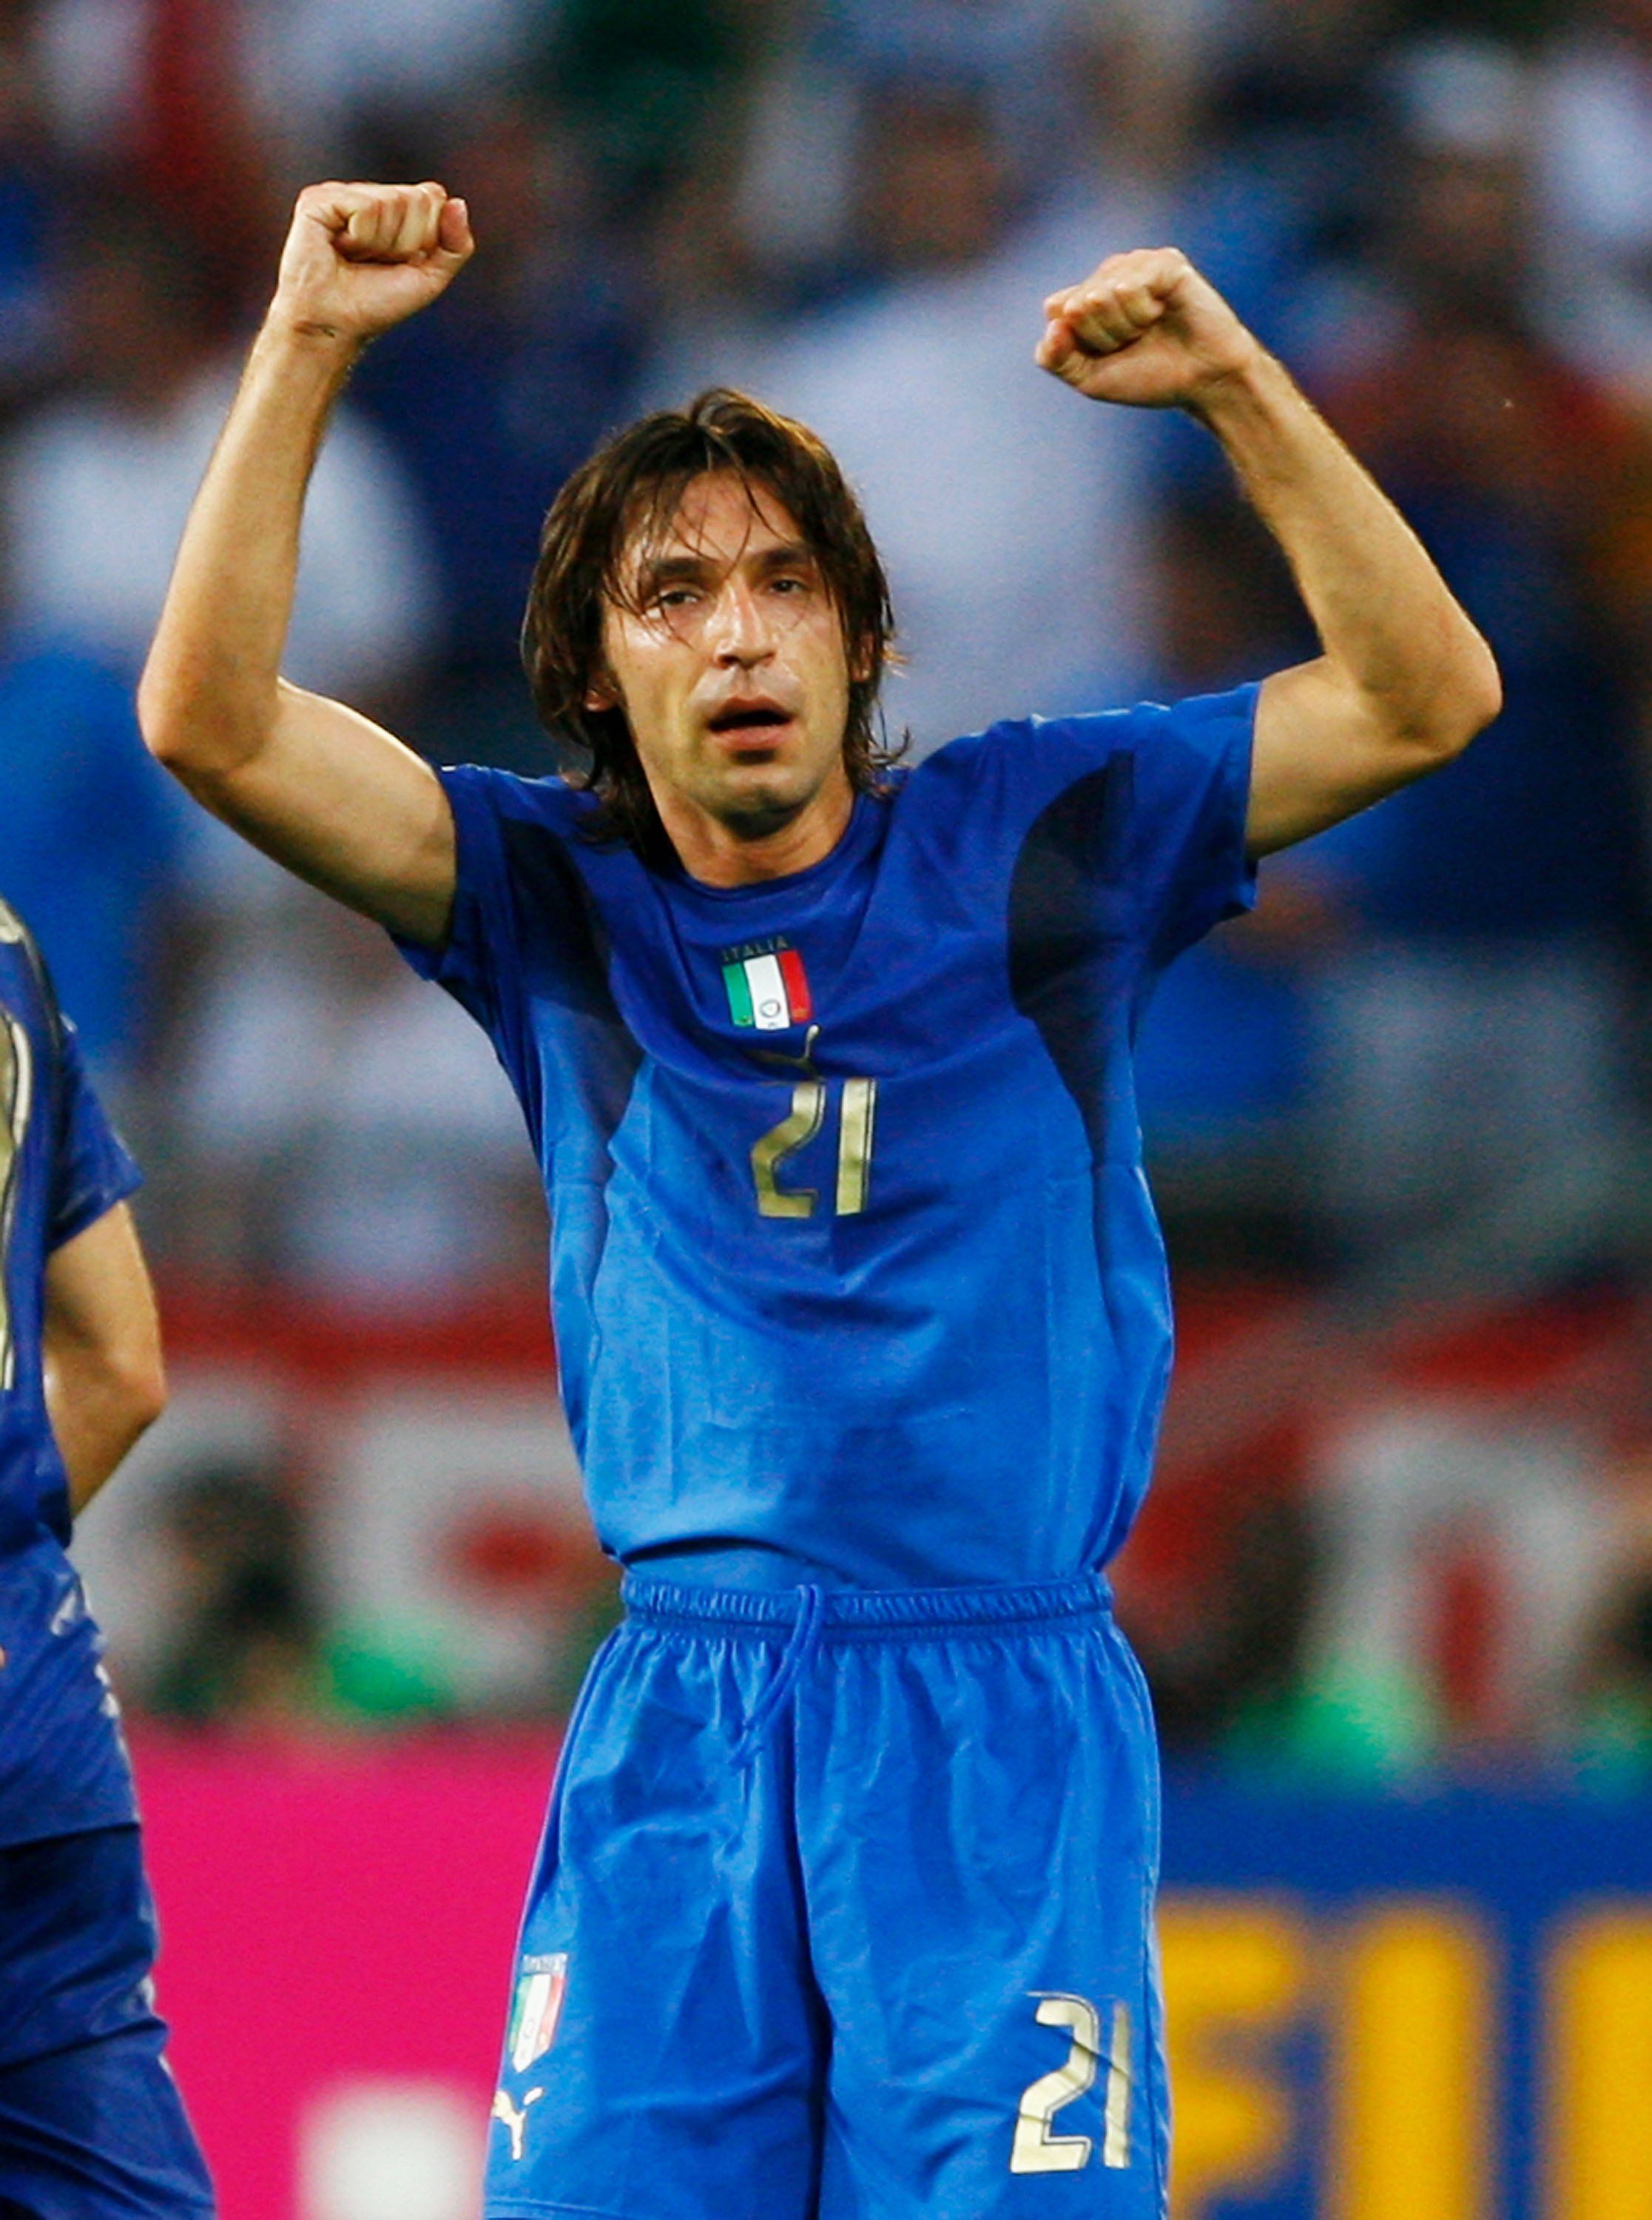 Pirlo celebrates at the 2006 World Cup.